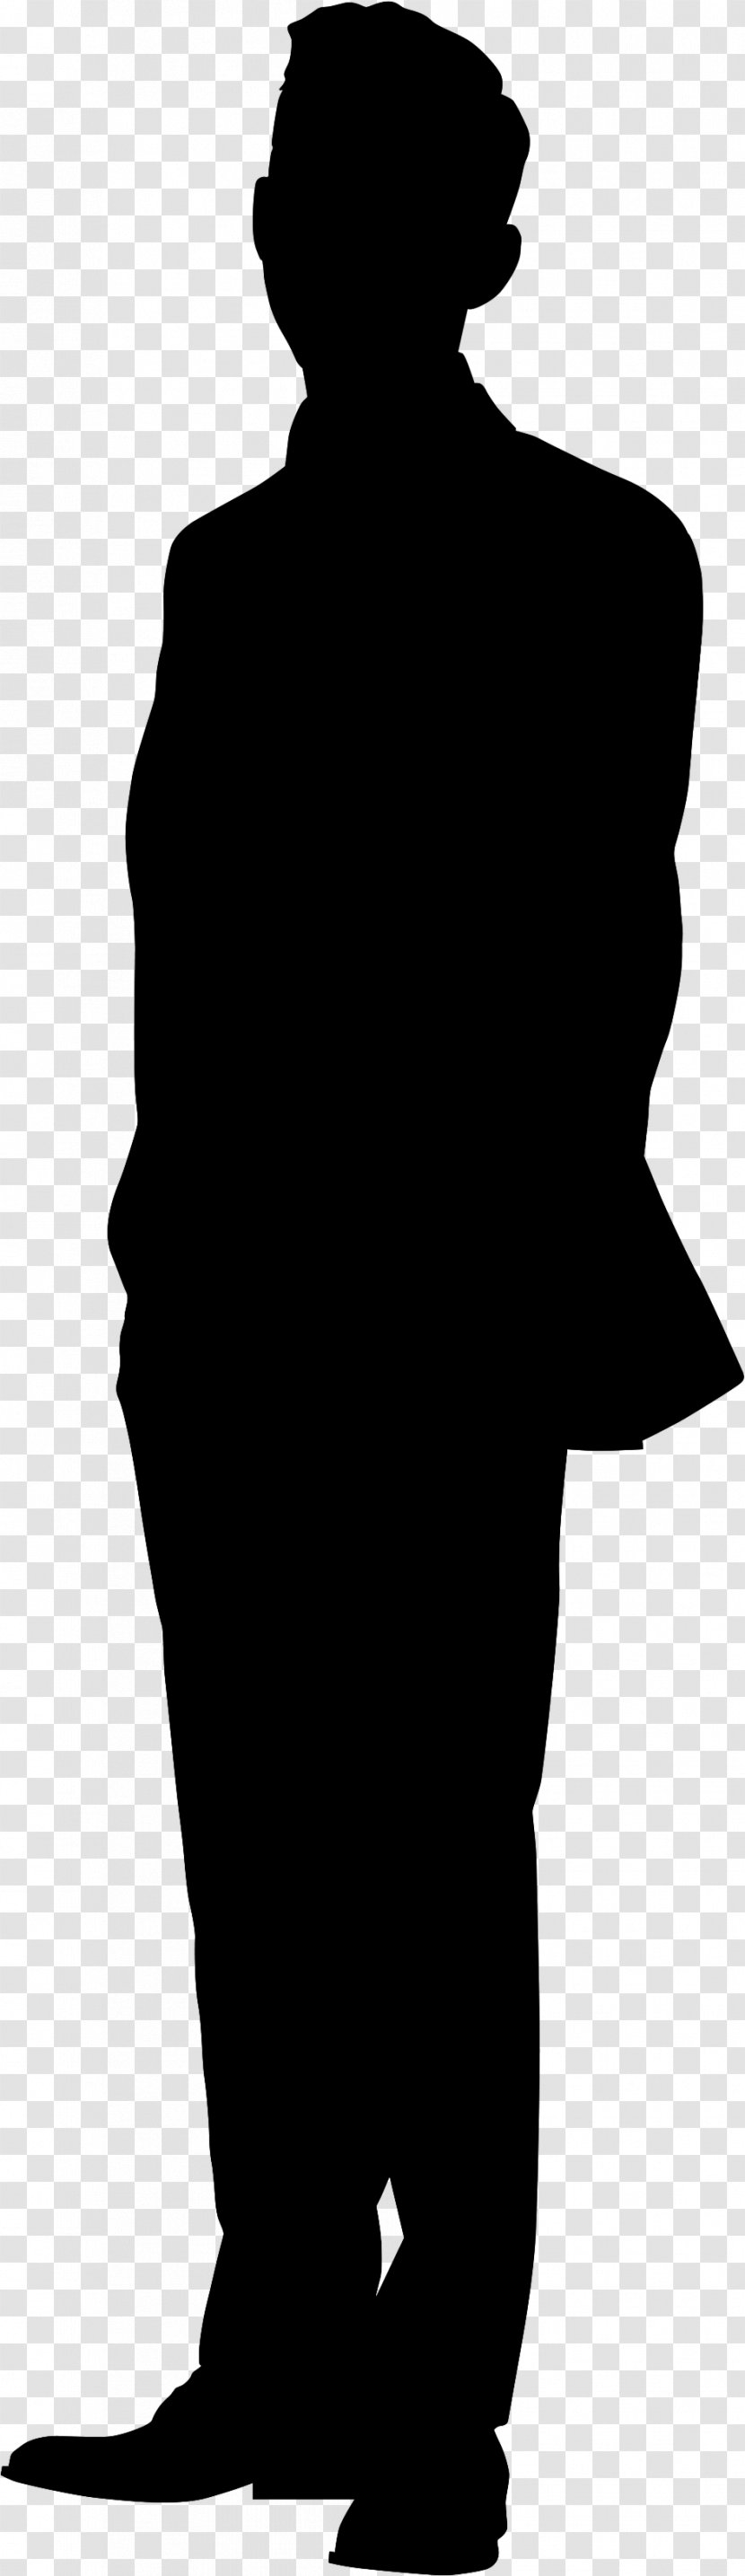 Silhouette Person Playwright - Male Transparent PNG